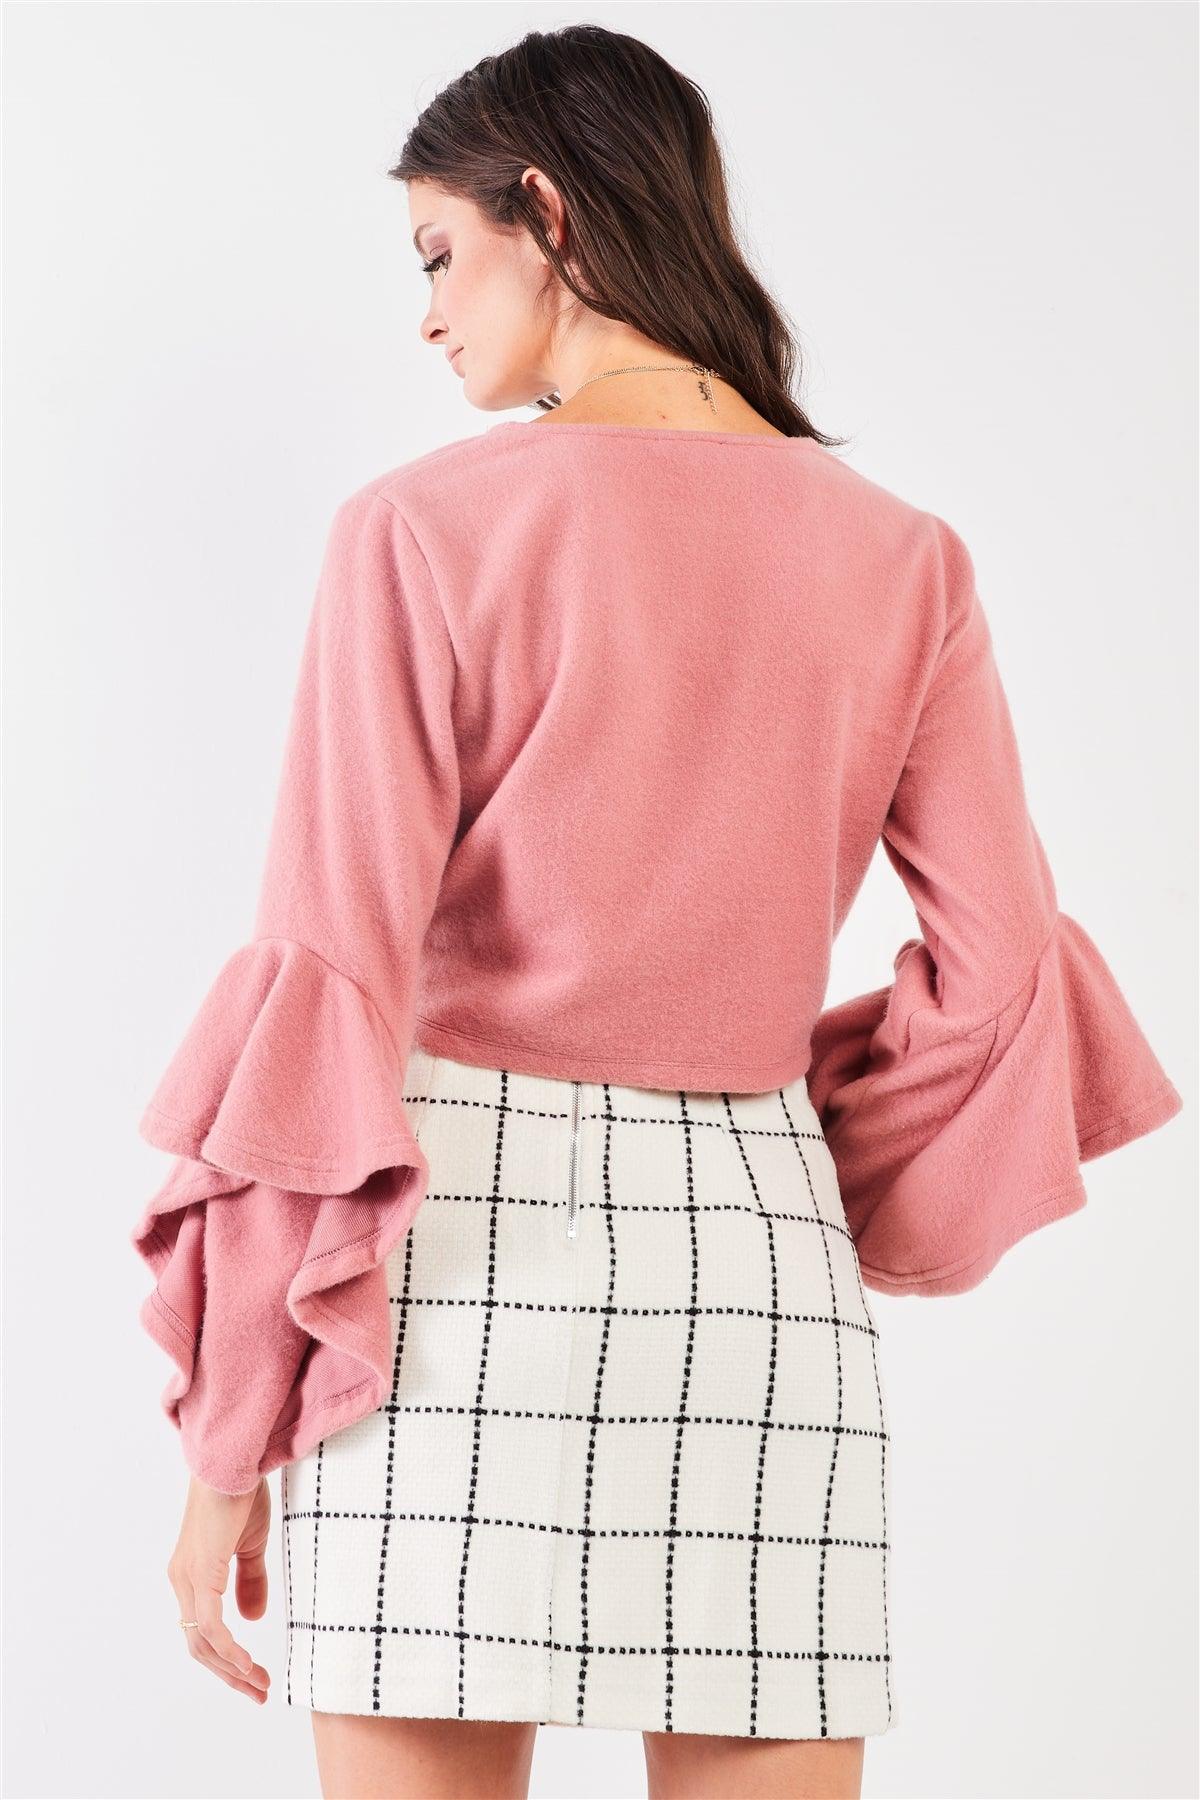 Blush Fuzzy Long Ruffle Sleeve V-Neck Self-Tie Front Detail Cropped Top /2-2-2